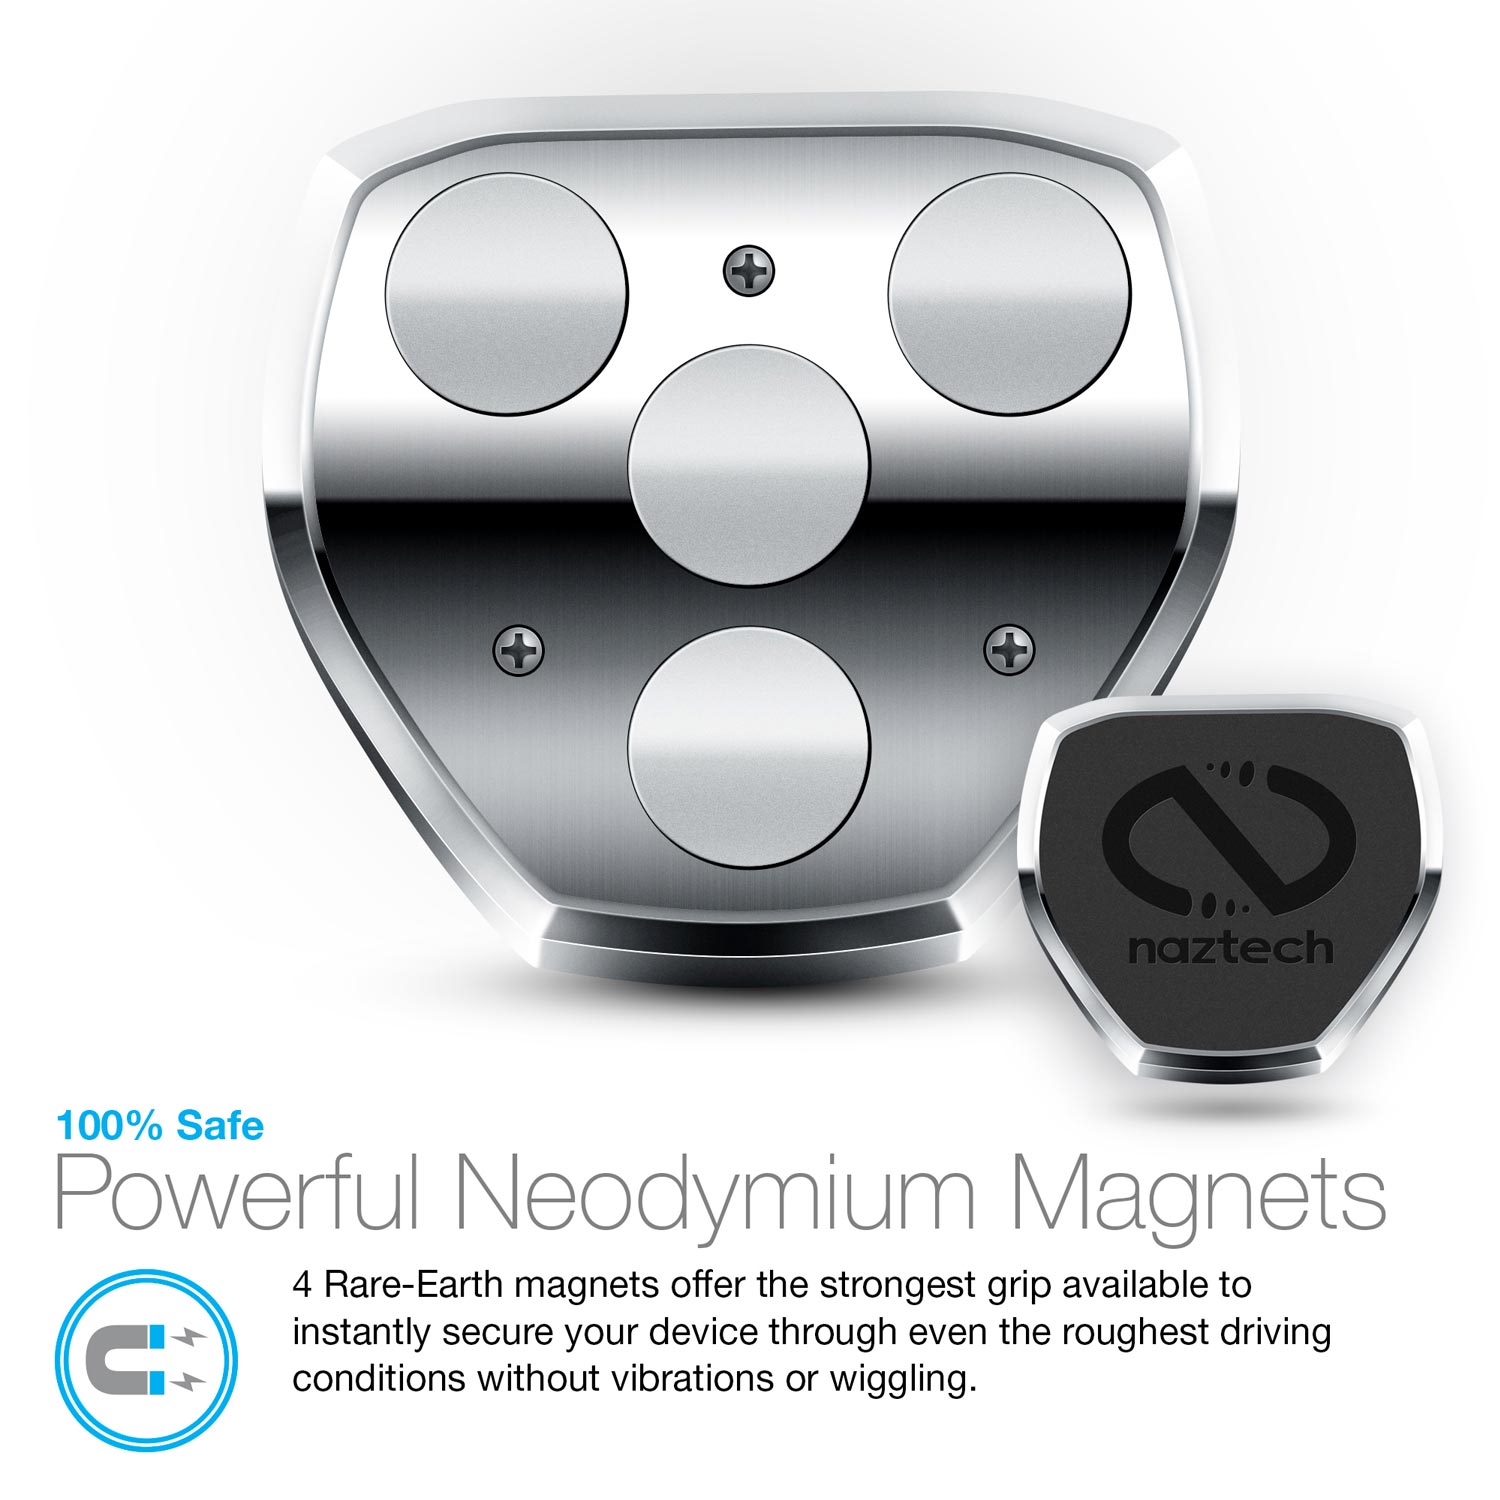 Naztech MagBuddy Universal Magnetic Vent+ Mount